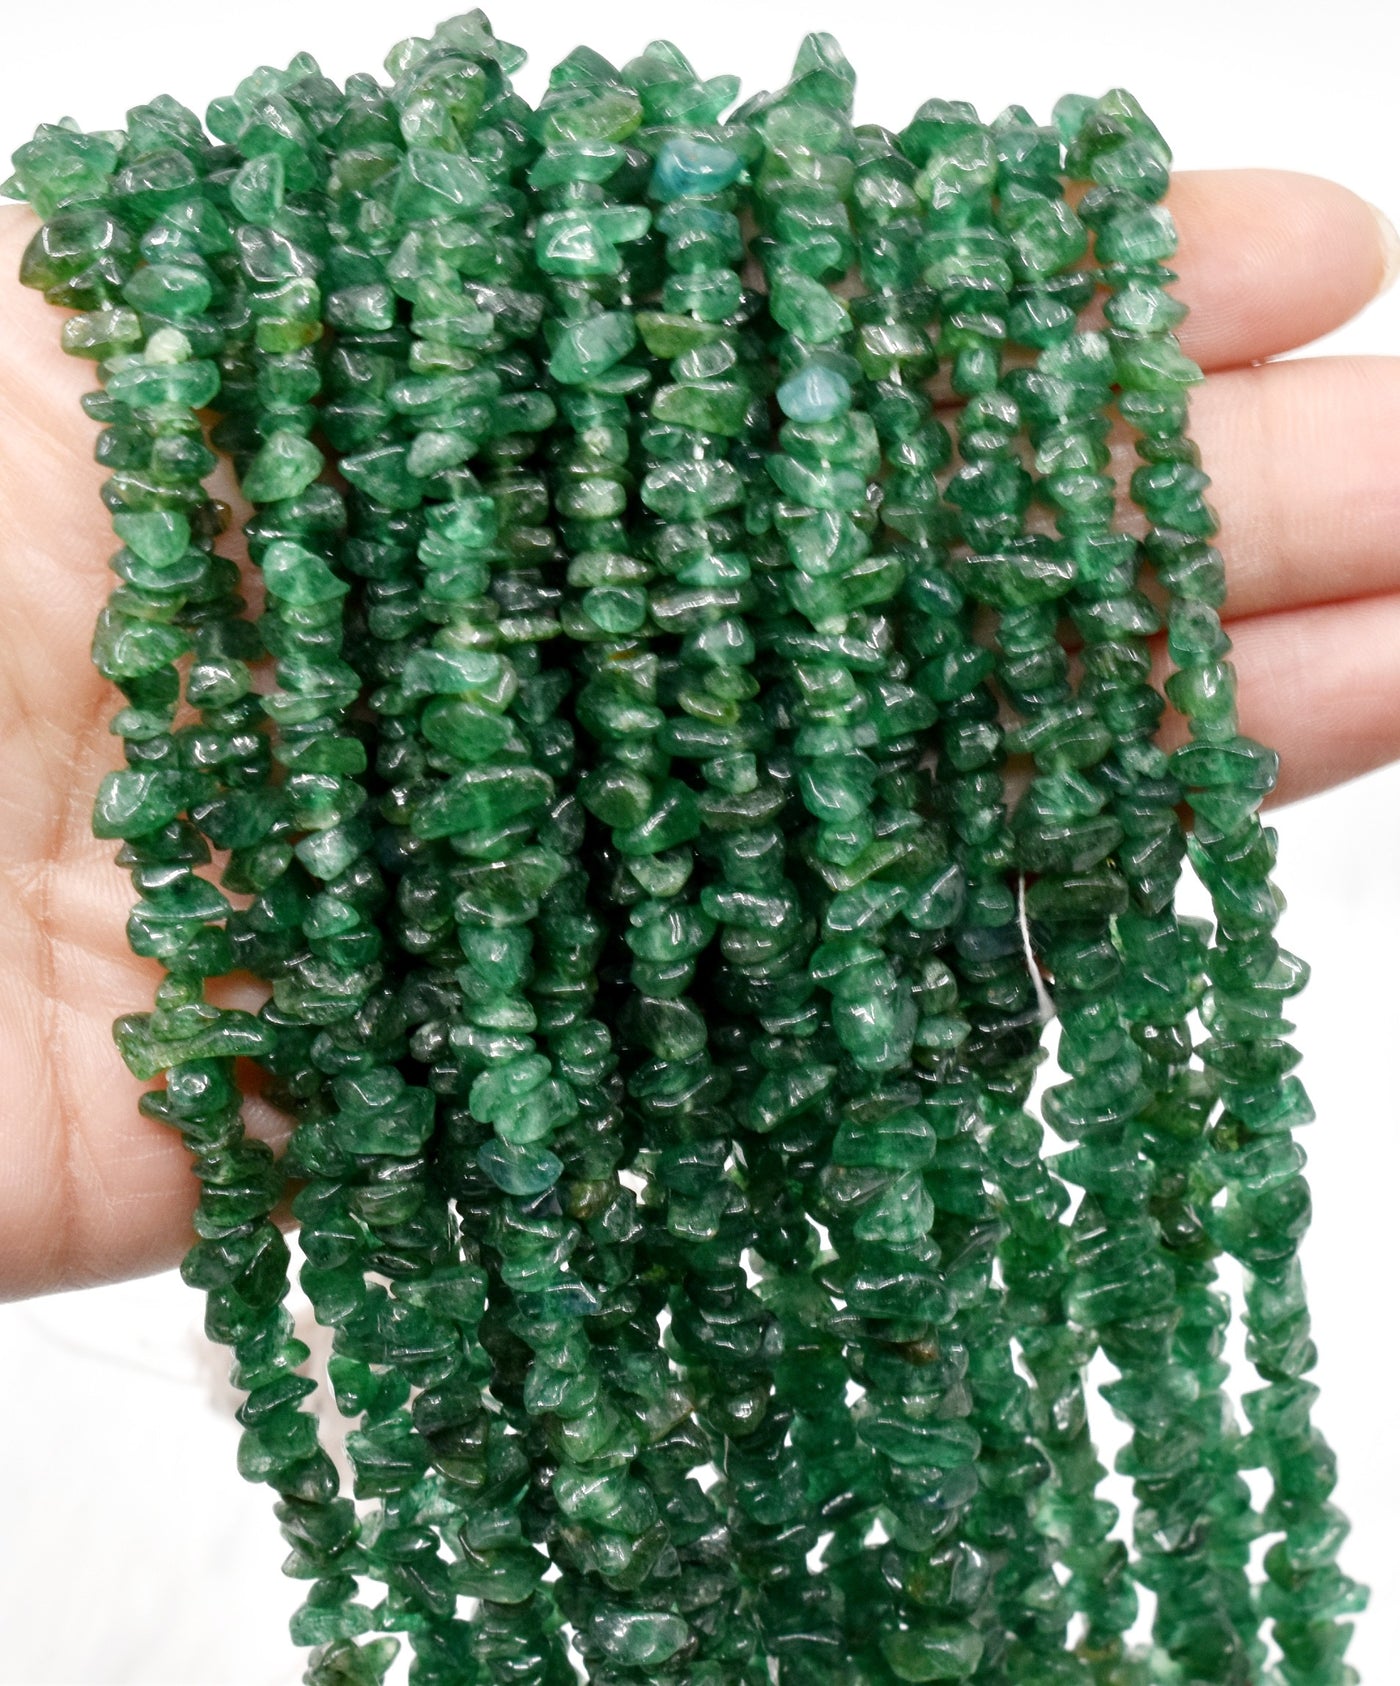 Uncut Raw Grosullar Jade Crystal Chip Beads for Necklace (Confidence and Determination )